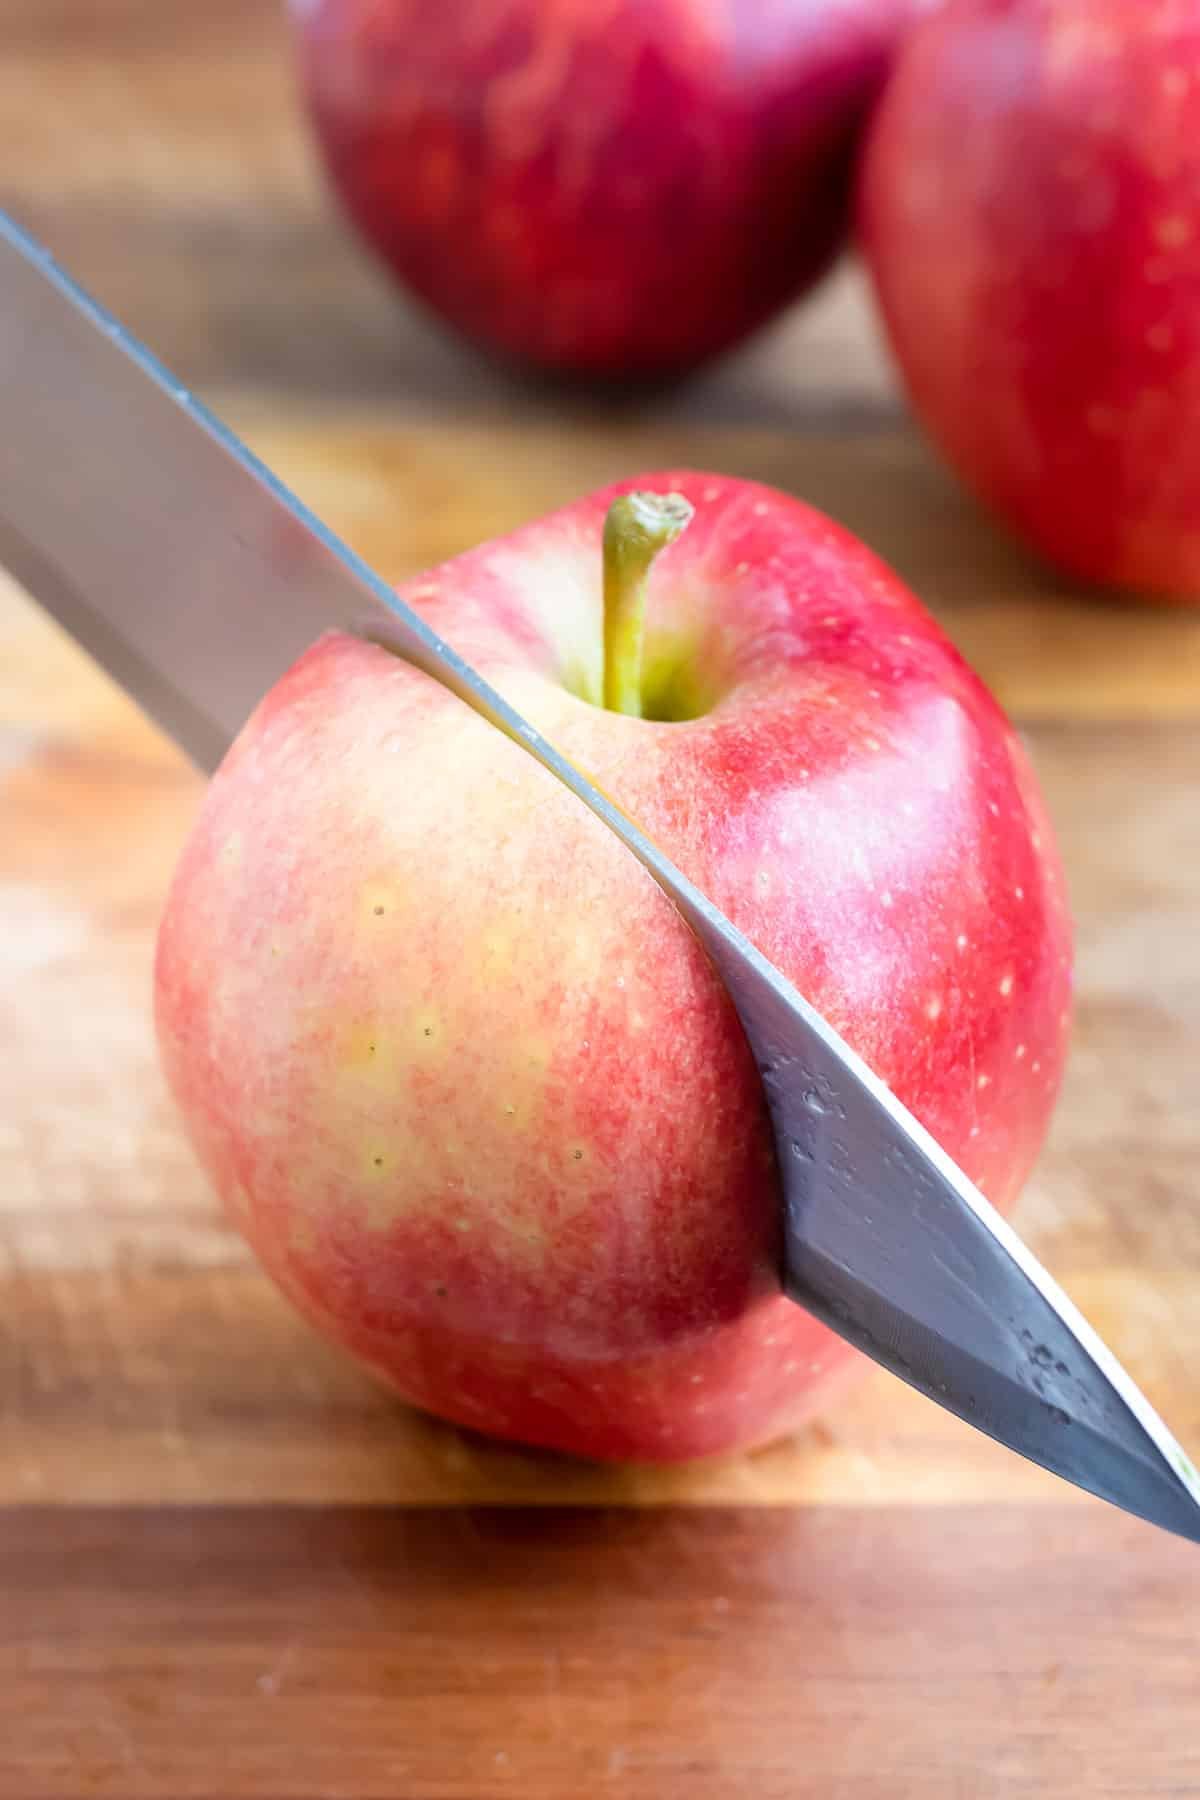 The best way to cut an apple is by coring and then cutting into apple slices.